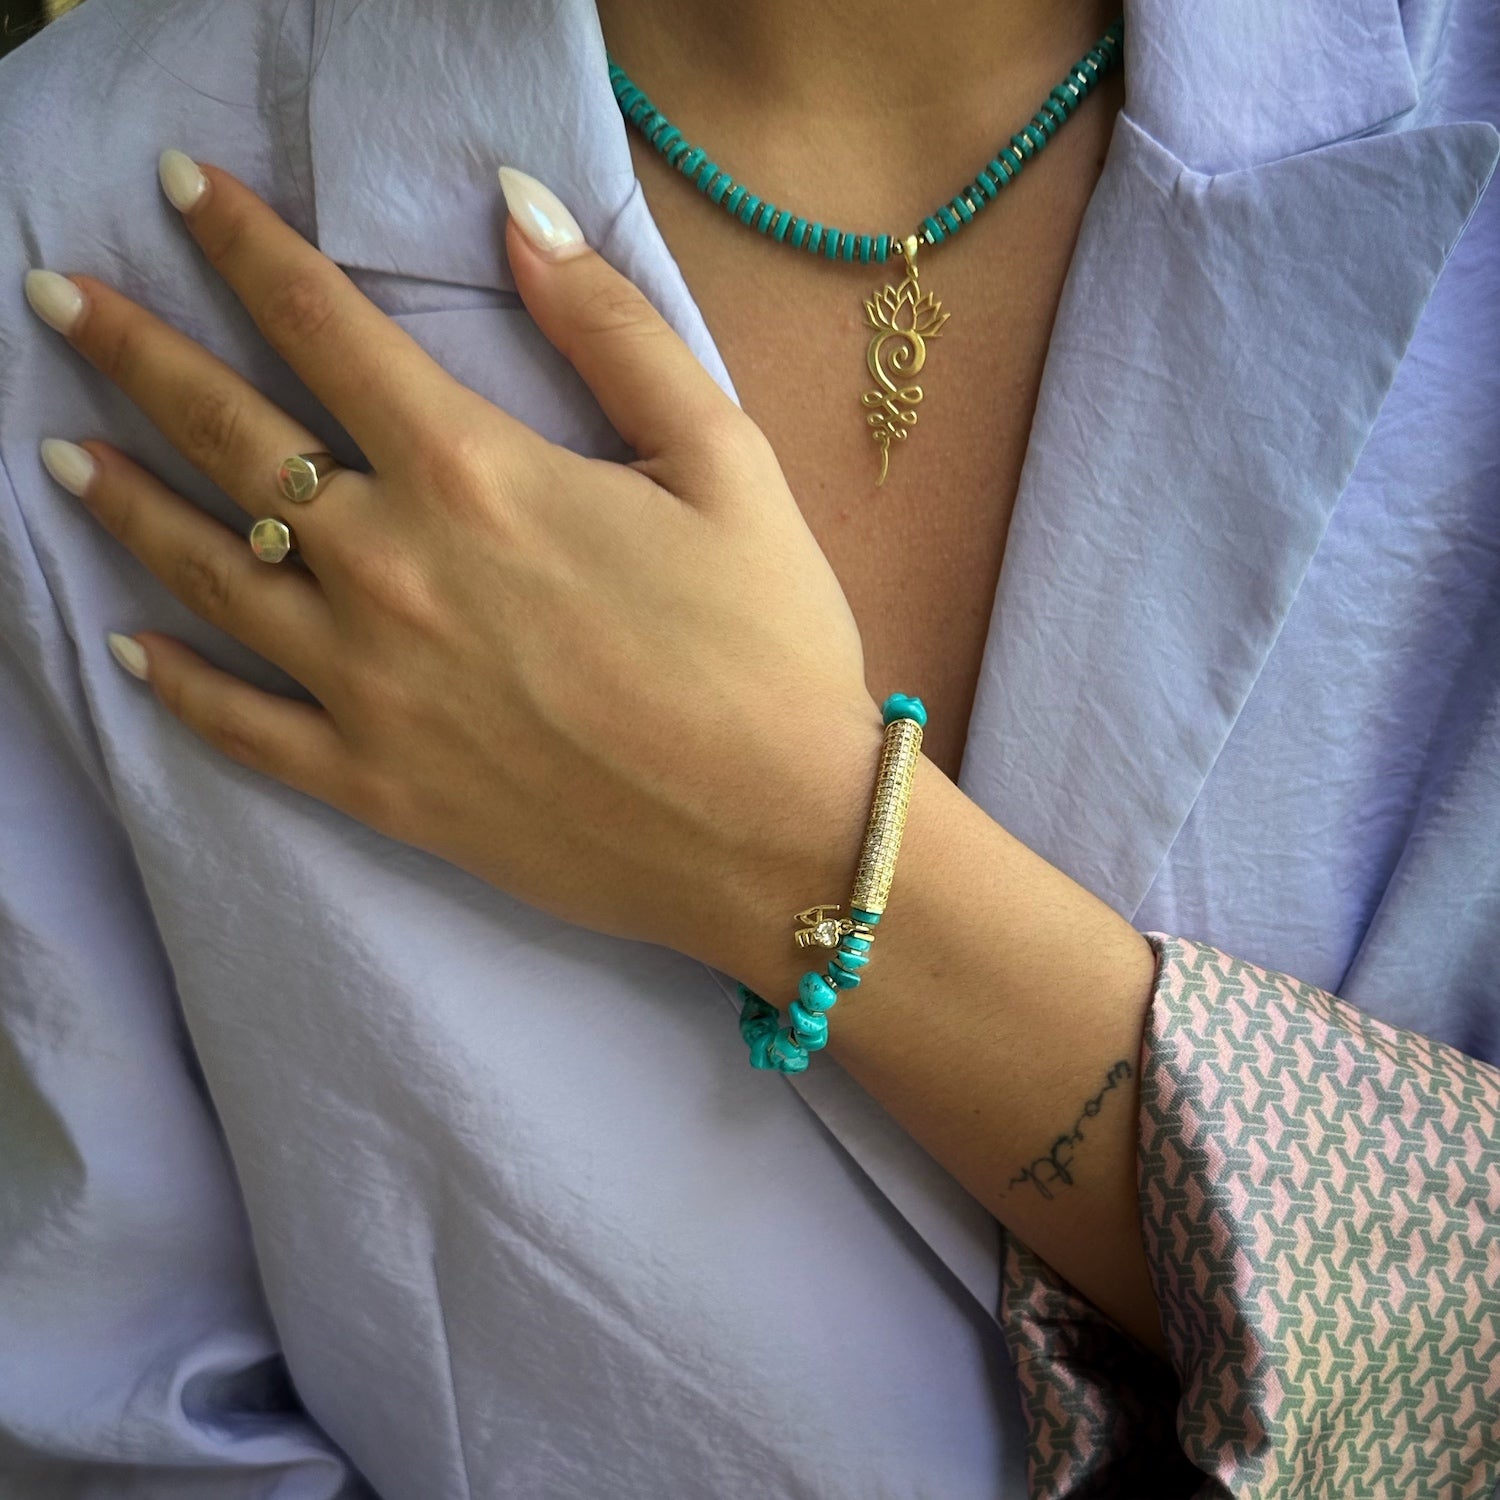 A hand model wearing the Diamond and Turquoise Love Bracelet, displaying its elegant design with turquoise stone beads, gold hematite spacers, and a gold plated love charm with a simulated diamond. The bracelet&#39;s stretchy jewelry cord ensures a comfortable fit.